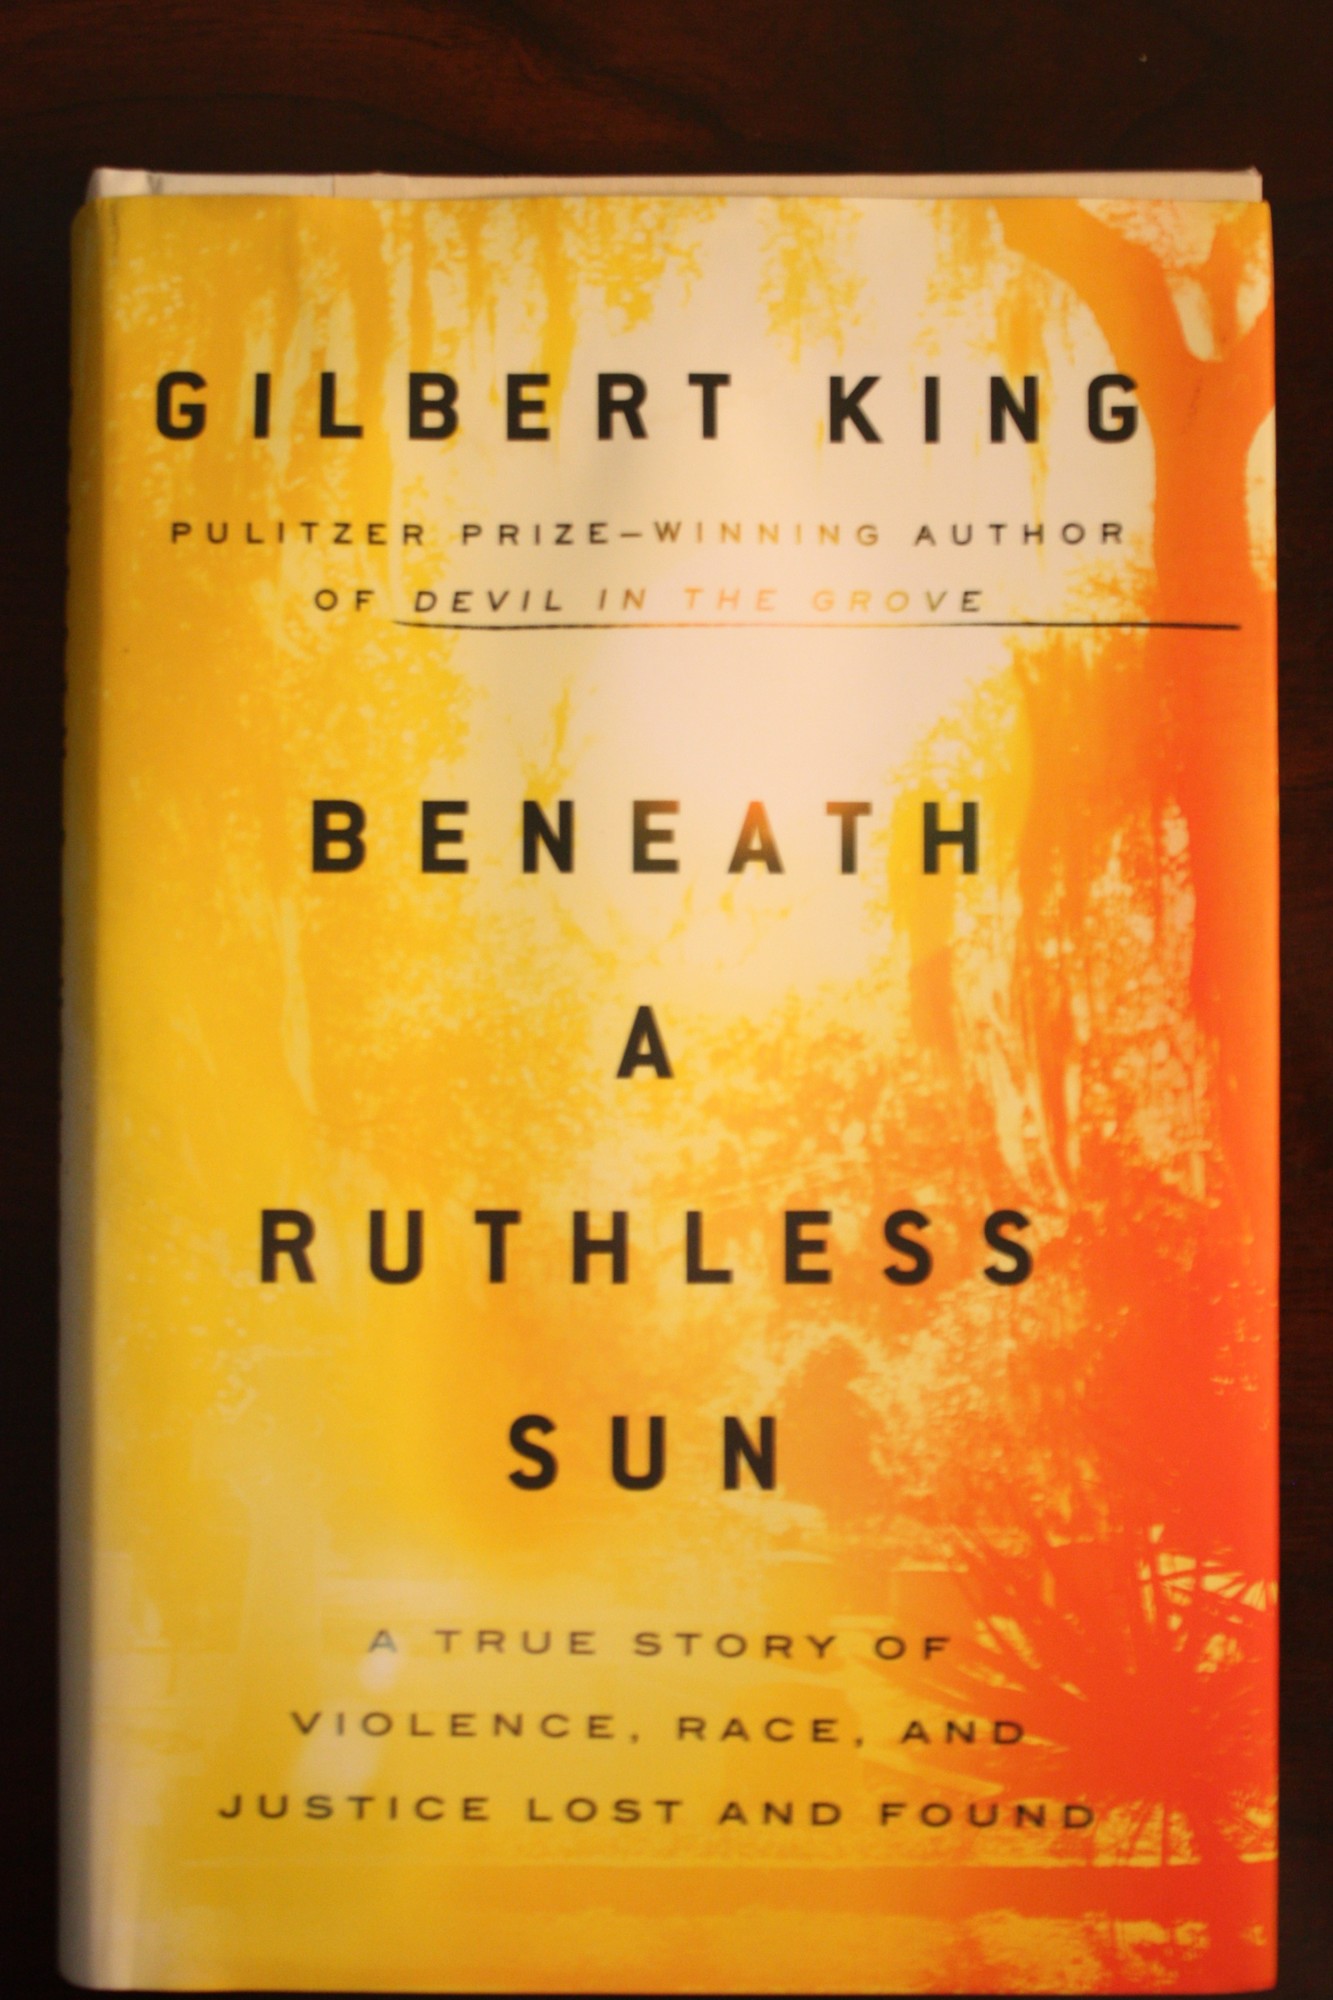 The story would be largely unknown if not for the book by Gilbert King. 